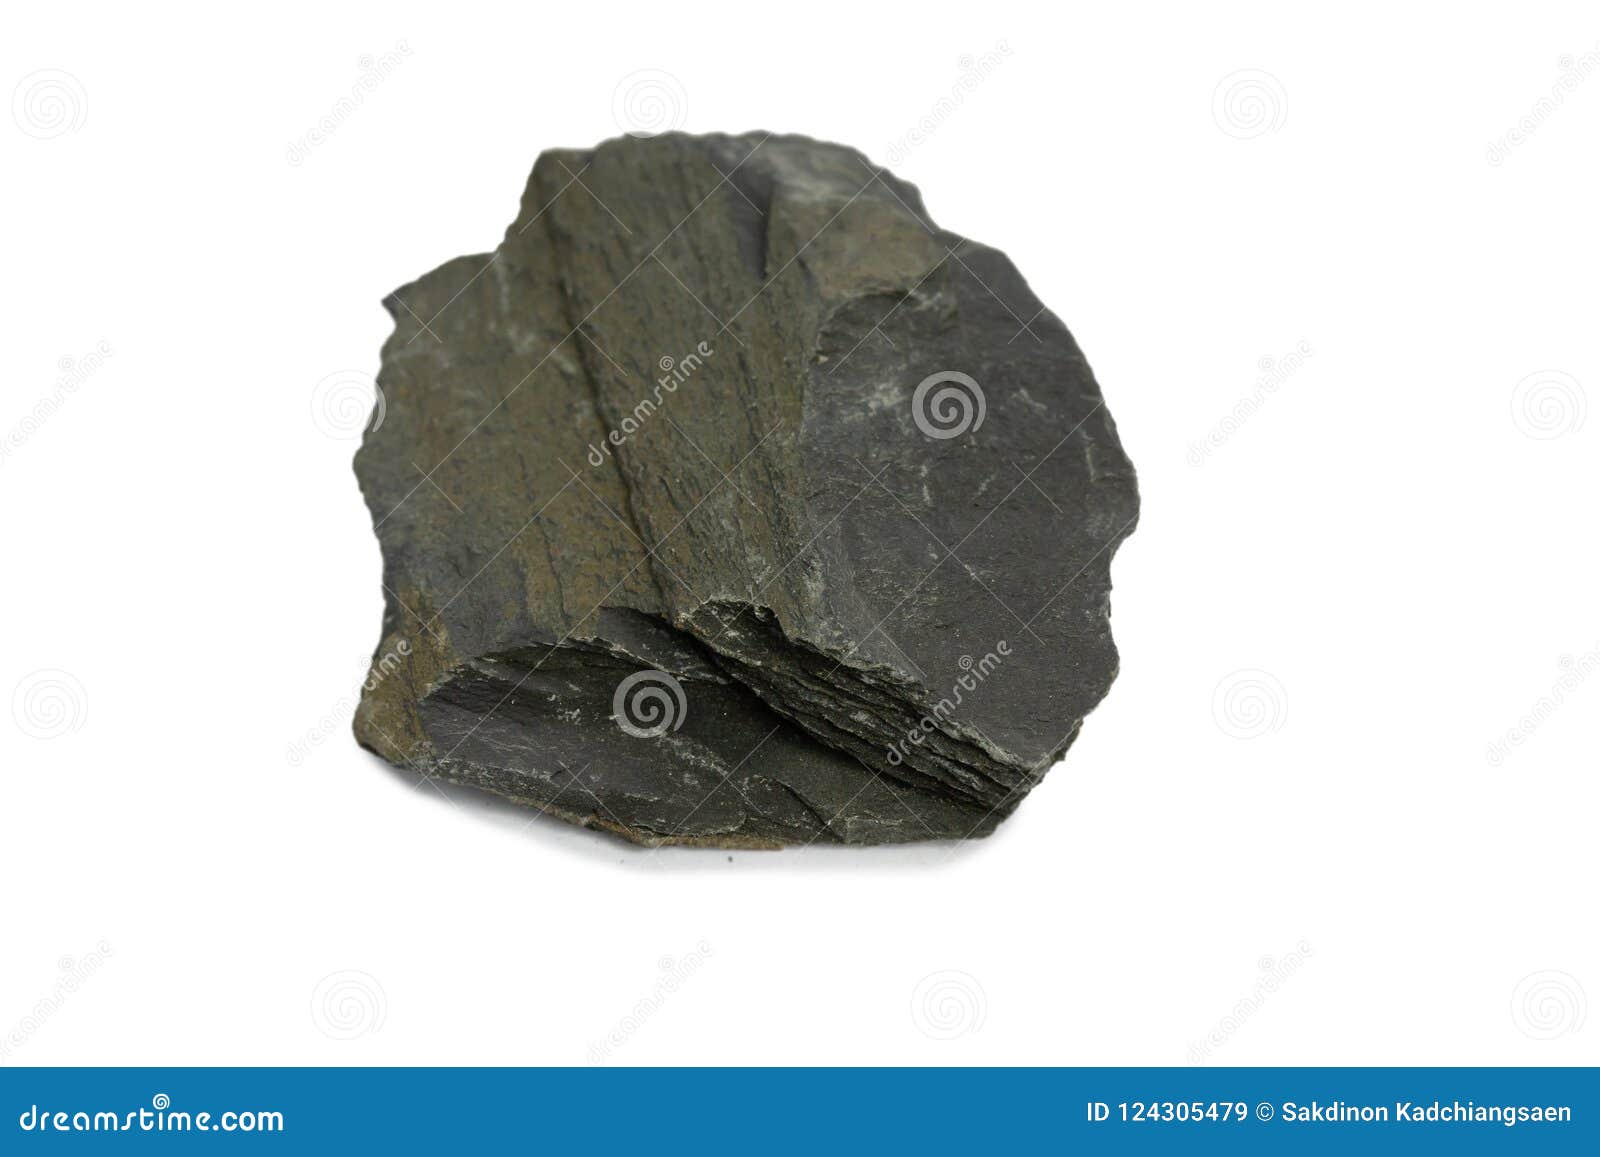 oil shale mineral stone